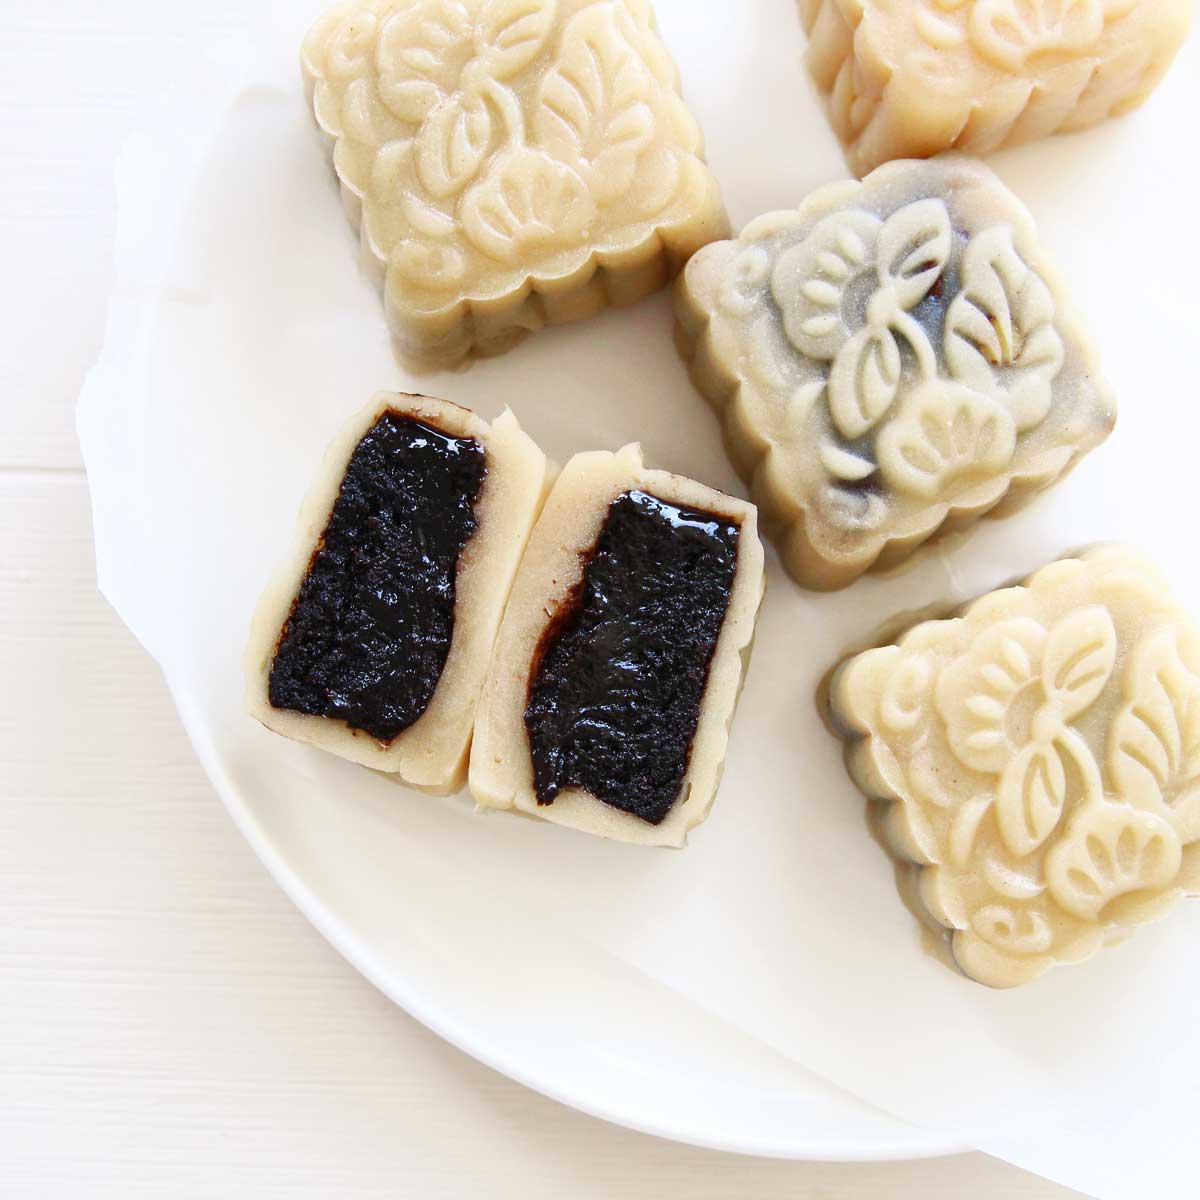 Peanut Butter Snow Skin Mooncakes with Brownie FIlling - Peanut Butter Snow Skin Mooncakes